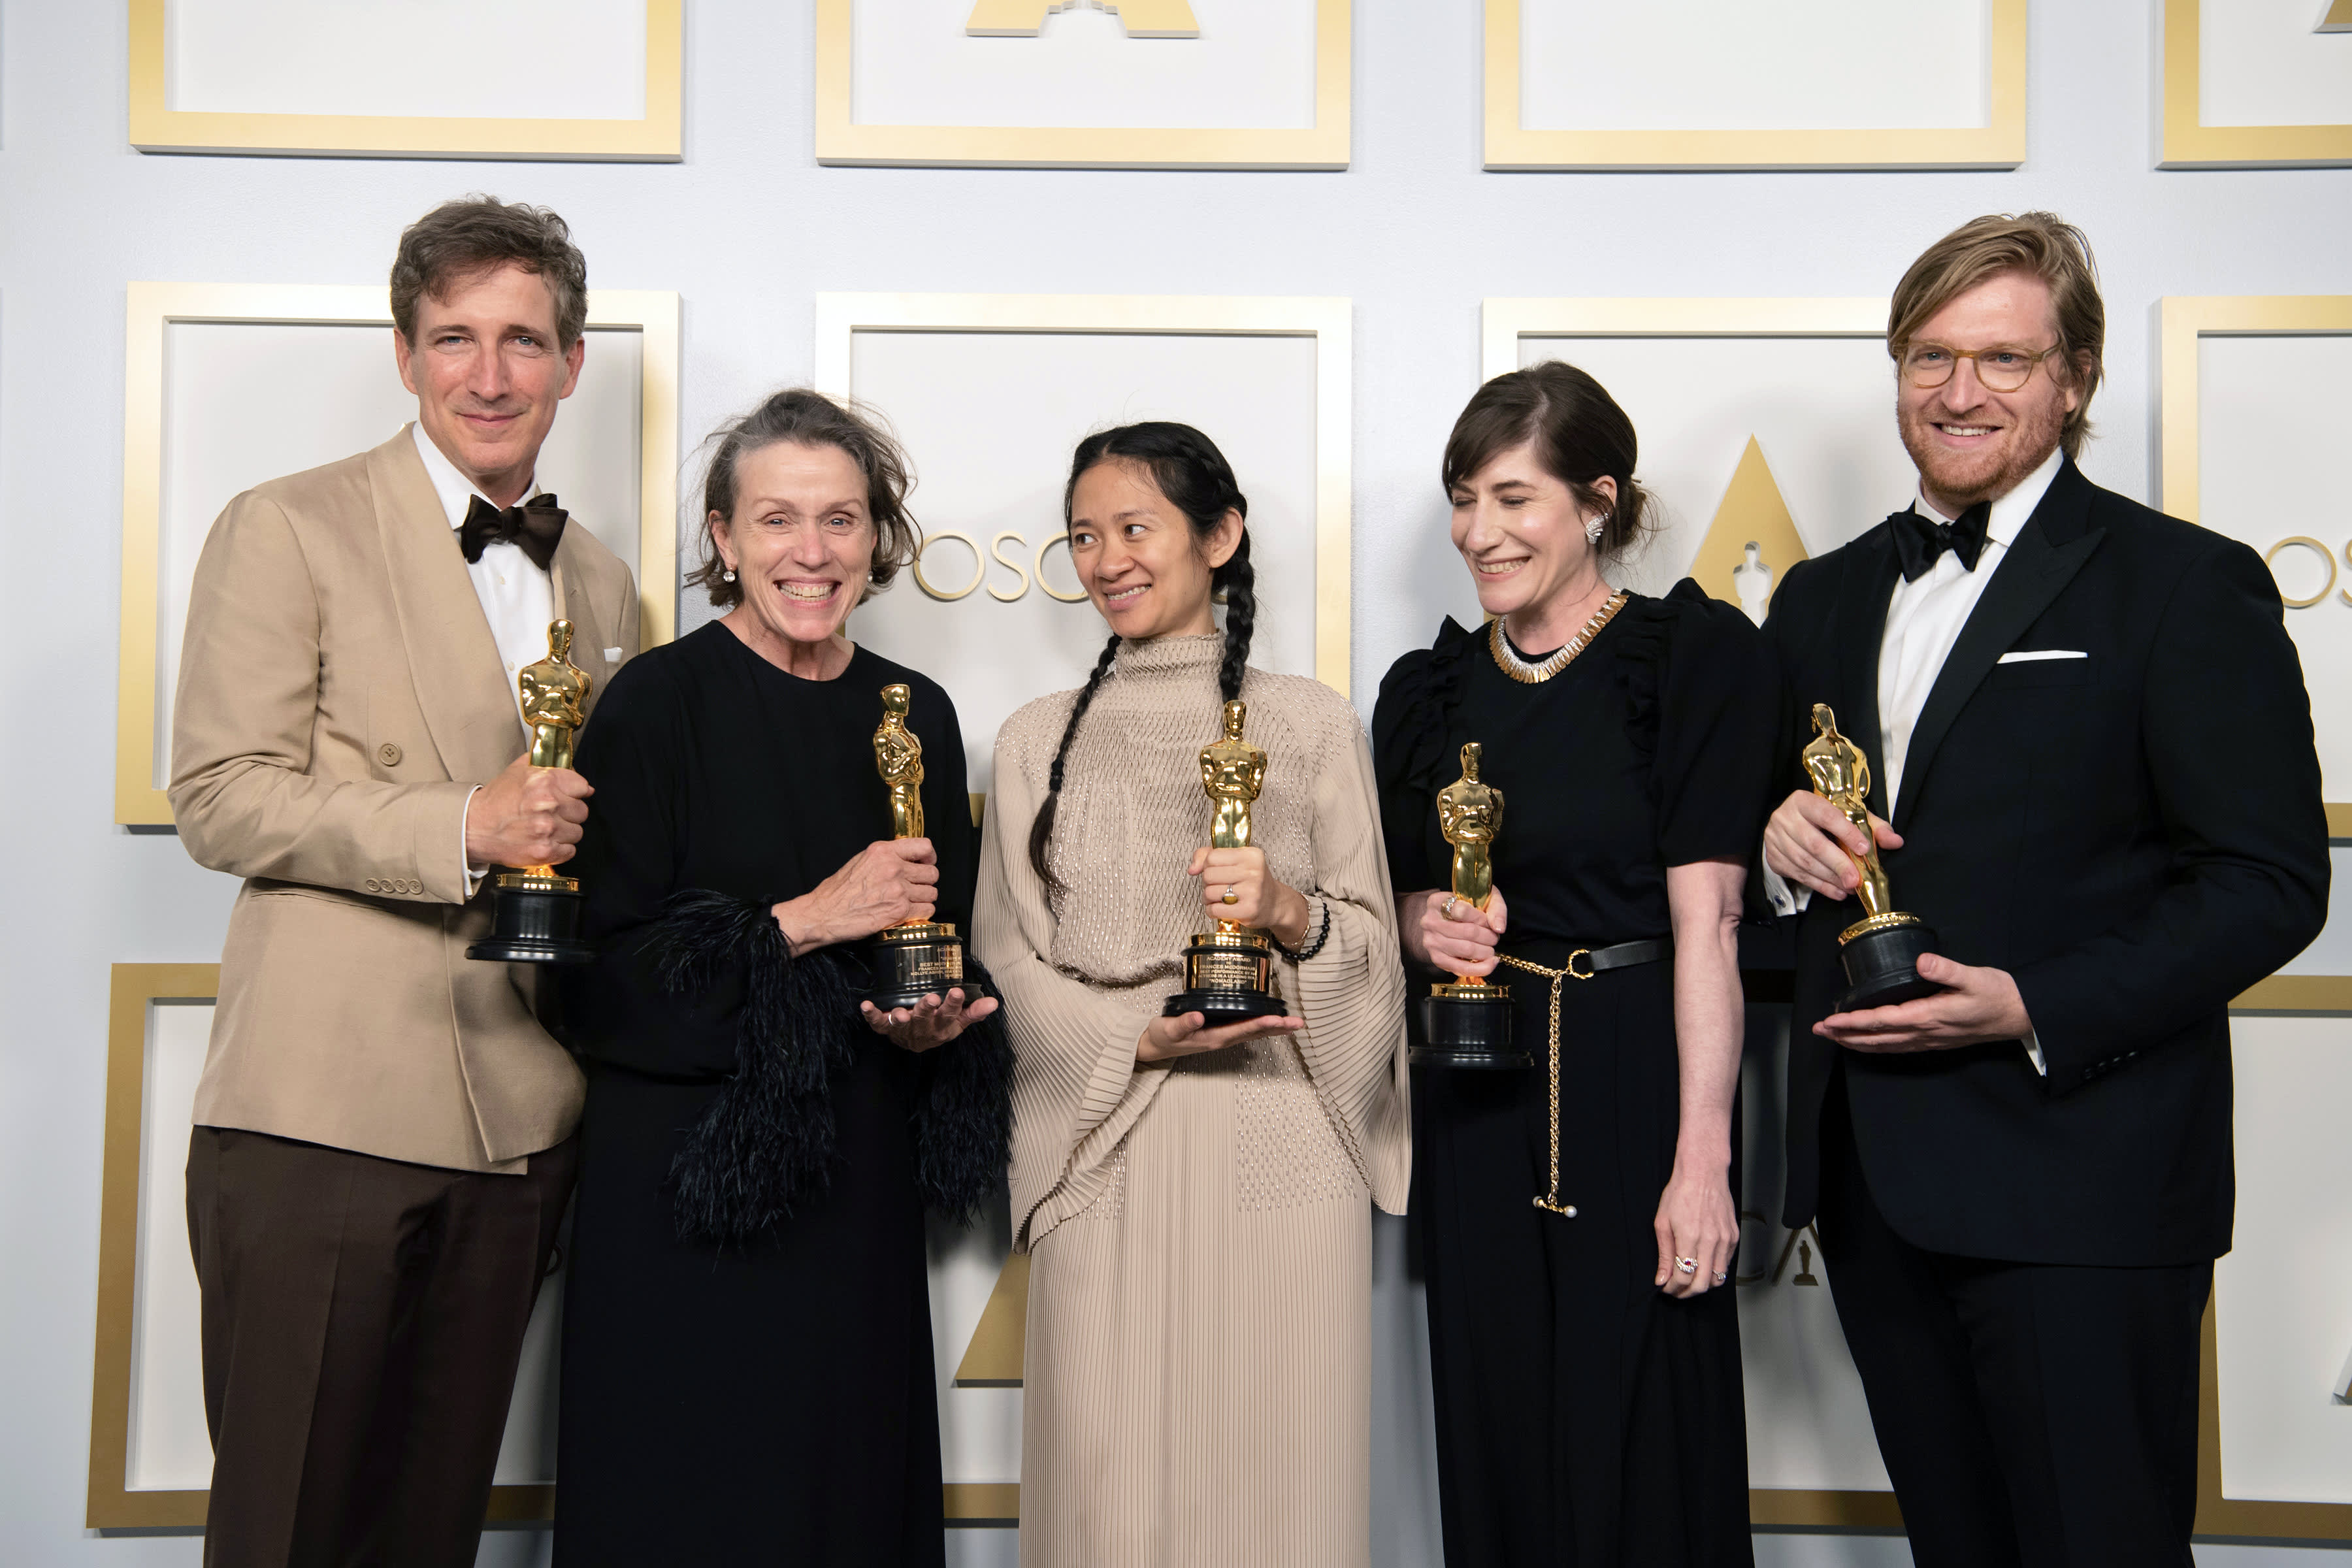 2021 Oscar: Best Supporting Actor nominees have already set records -  GoldDerby